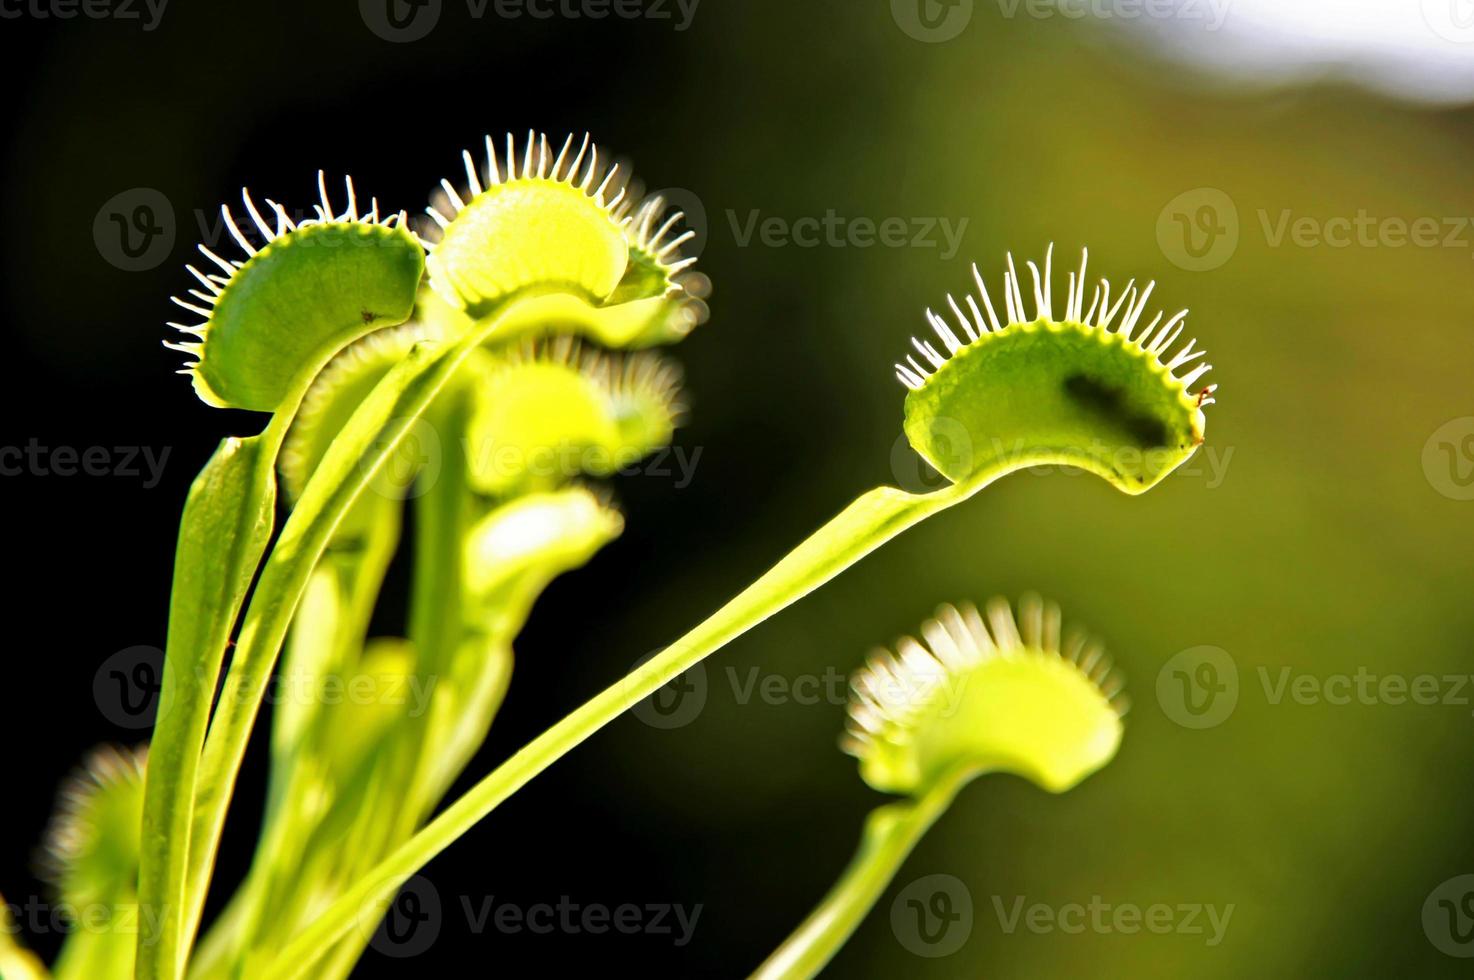 Fly eaten by a hungry venus fly trap plant photo